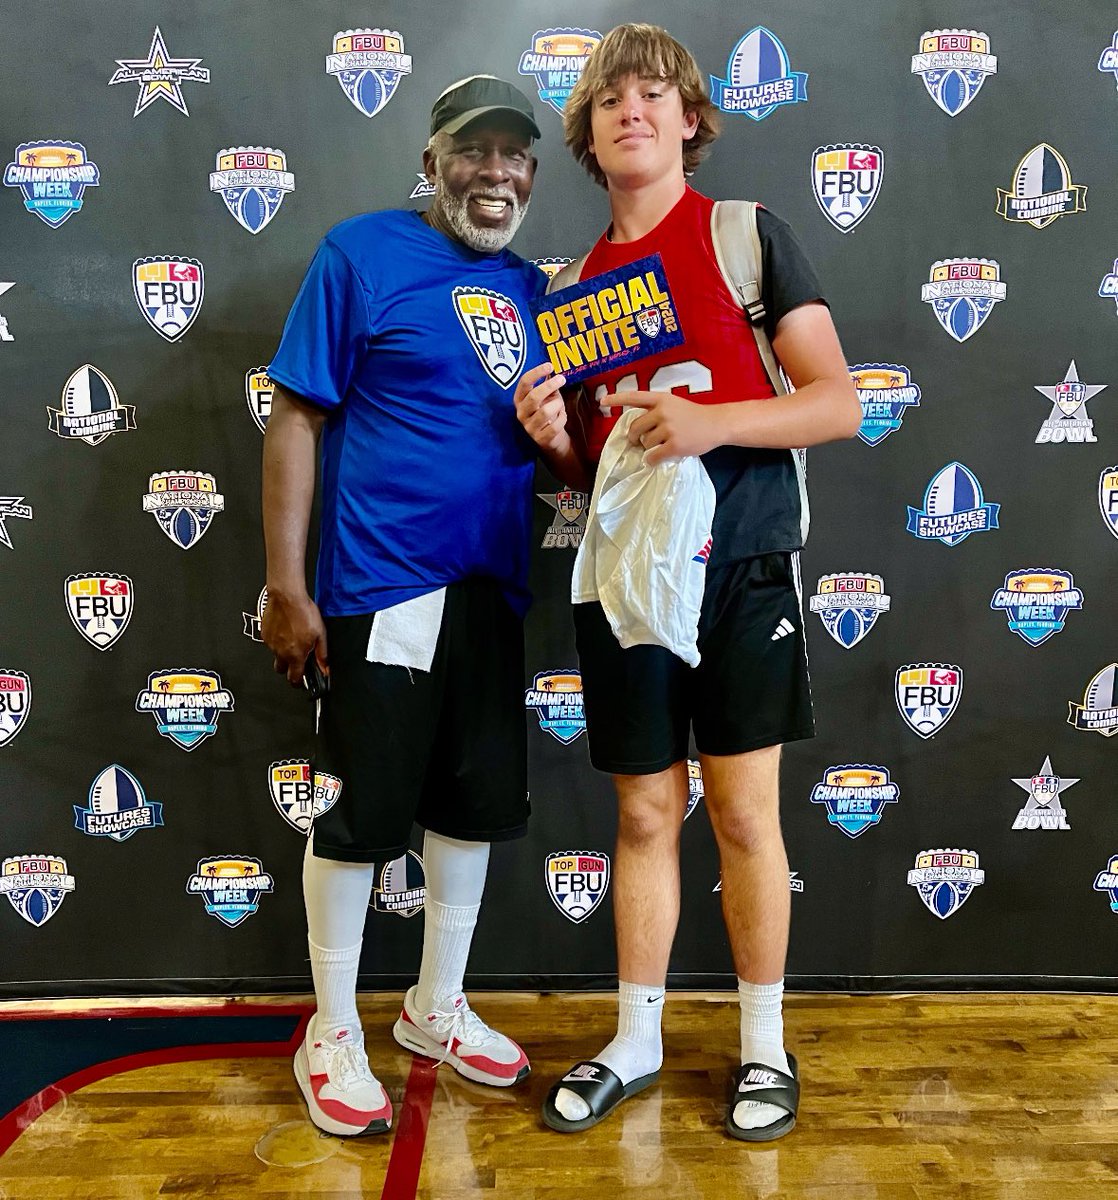 Thank you @FBUcamp for the experience and Top Gun invite! One step closer to the Freshman All American Bowl invite #allamerican #knockingonthedoor #hardworkpaysoff #TheYorkWay

@YorkRecruits @Cmac5313 @ErikRichardsUSA @RayIsaacSchool @TSSpeedAcademy @QBHitList